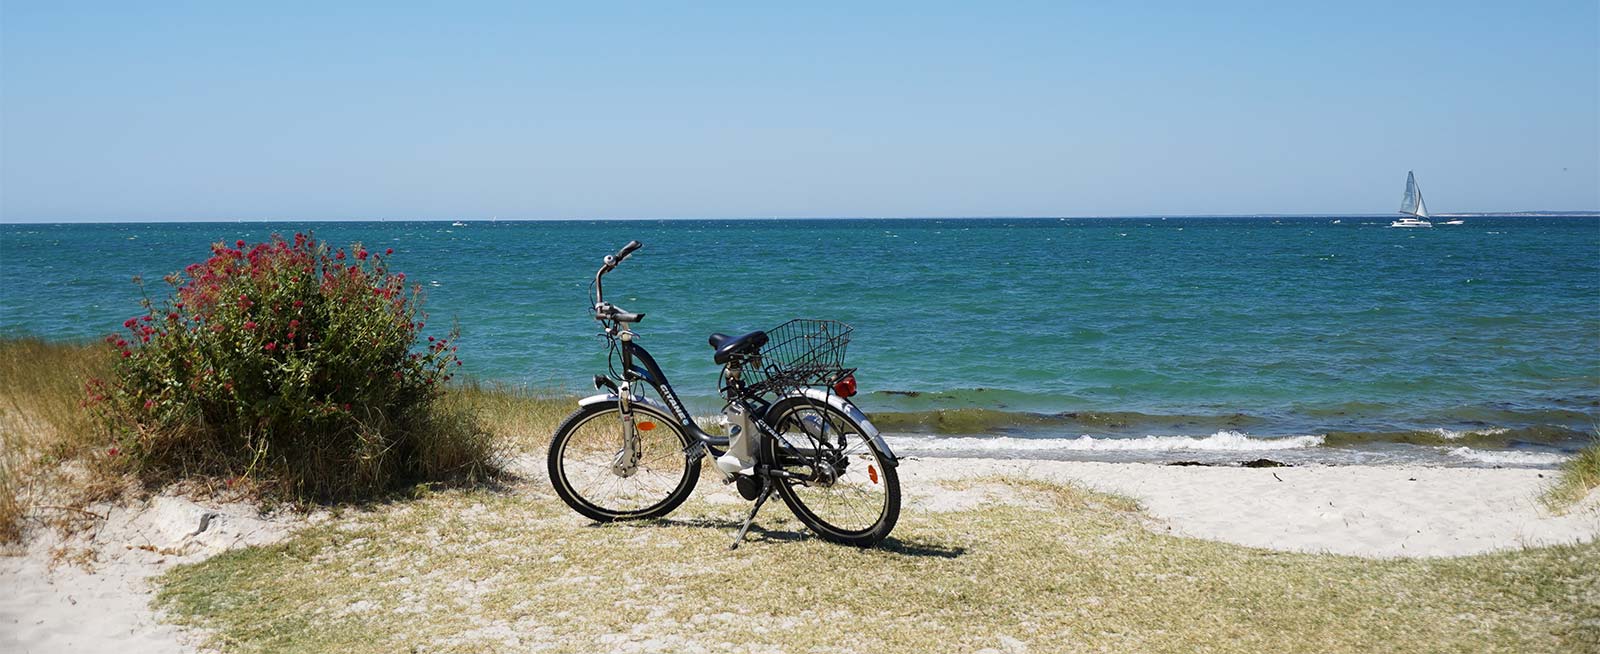 Cycling by the ocean on the island of Oléron